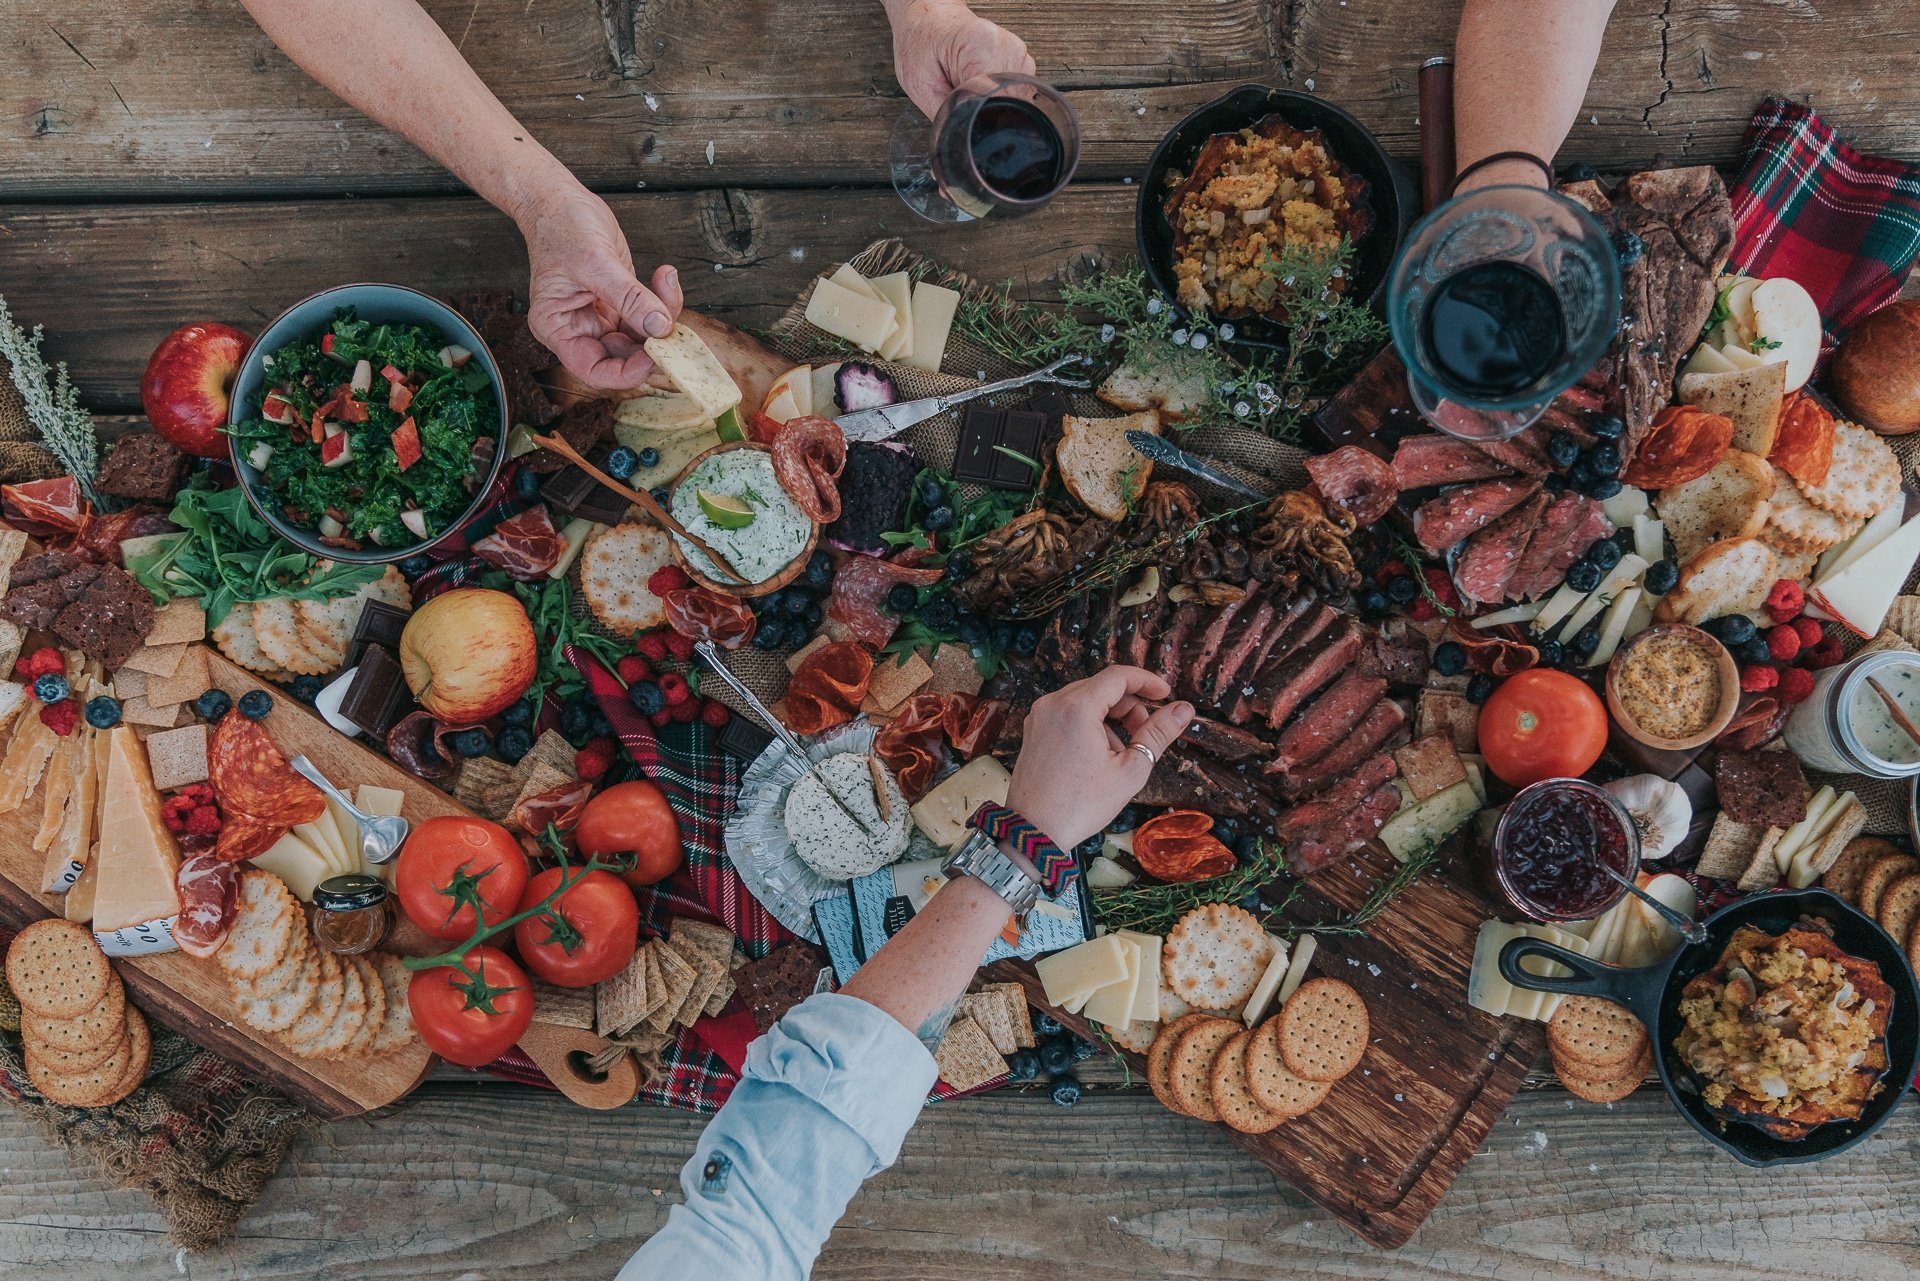 Overhead shot of rustic table and charcuterie board with hands reaching in.